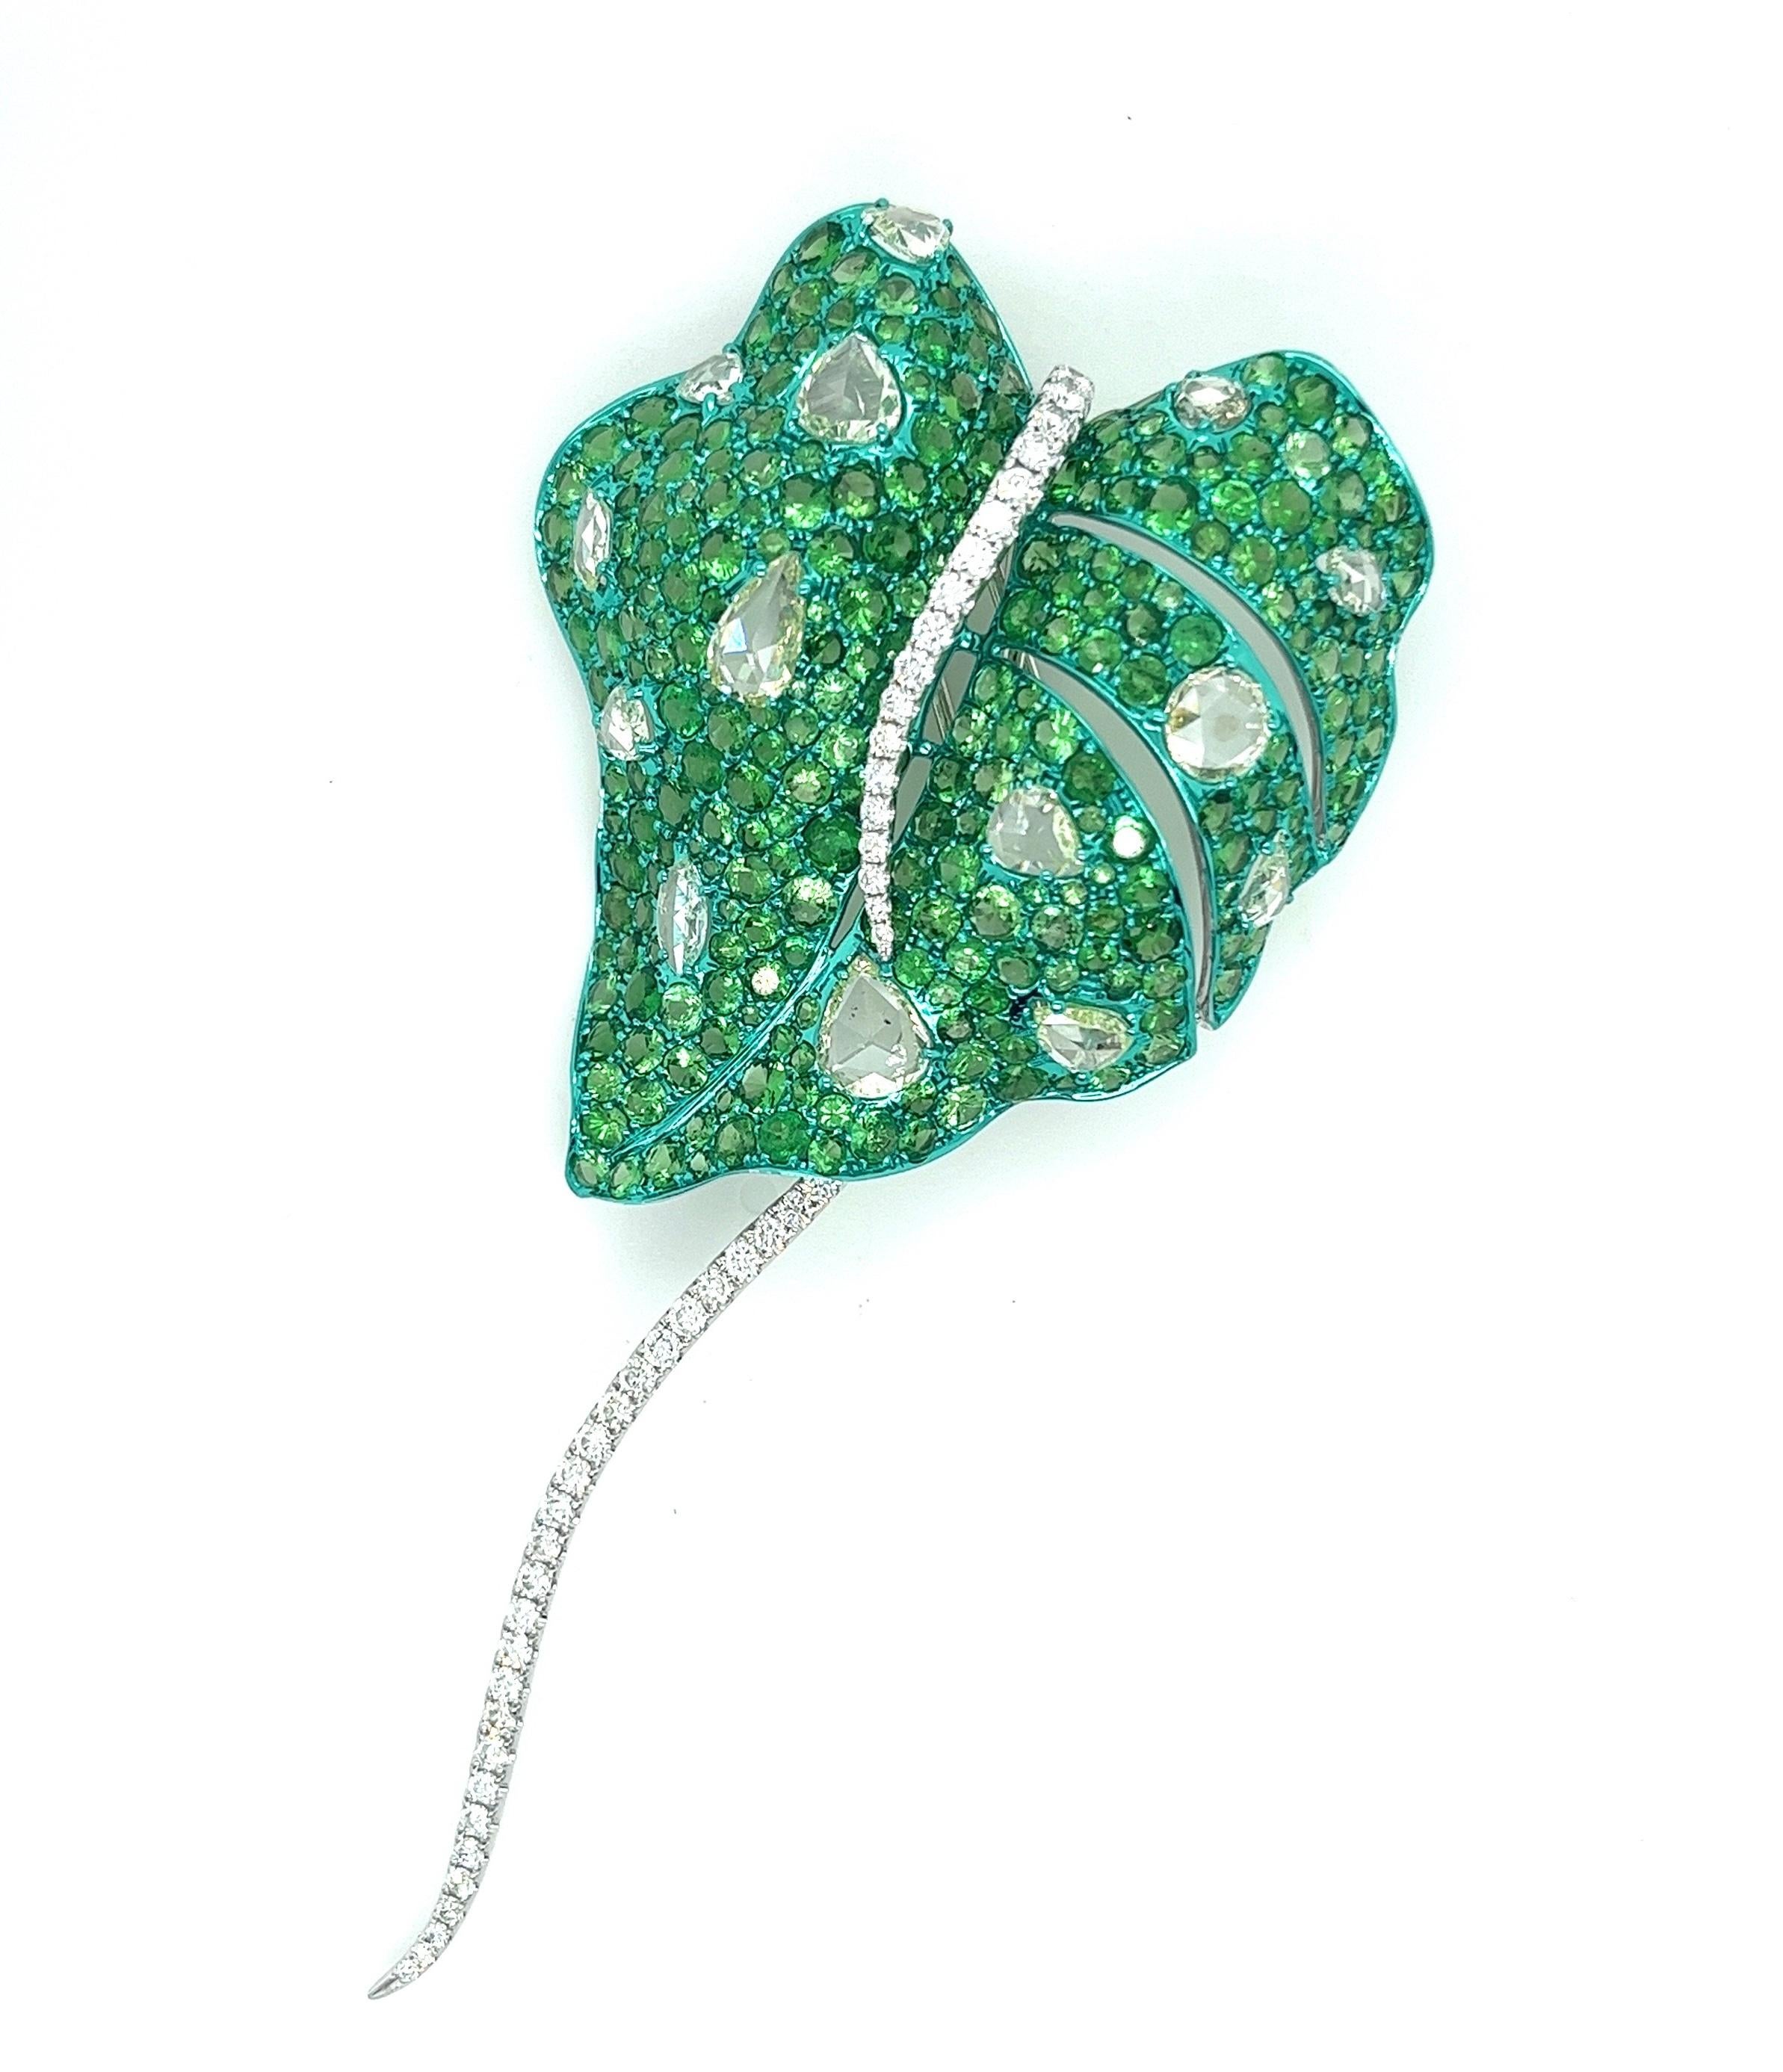 18K White Gold Diamond & Green Garnet Narcissus Leaf Brooch

271 Green Garnets - 13.670 CT
14 Diamonds - 3.11 CT
52 Diamonds - 1.240 CT
18K White Gold - 17.020 GM

Introducing the exquisite Water Lily Leaf Brooch by Althoff Jewelry, meticulously